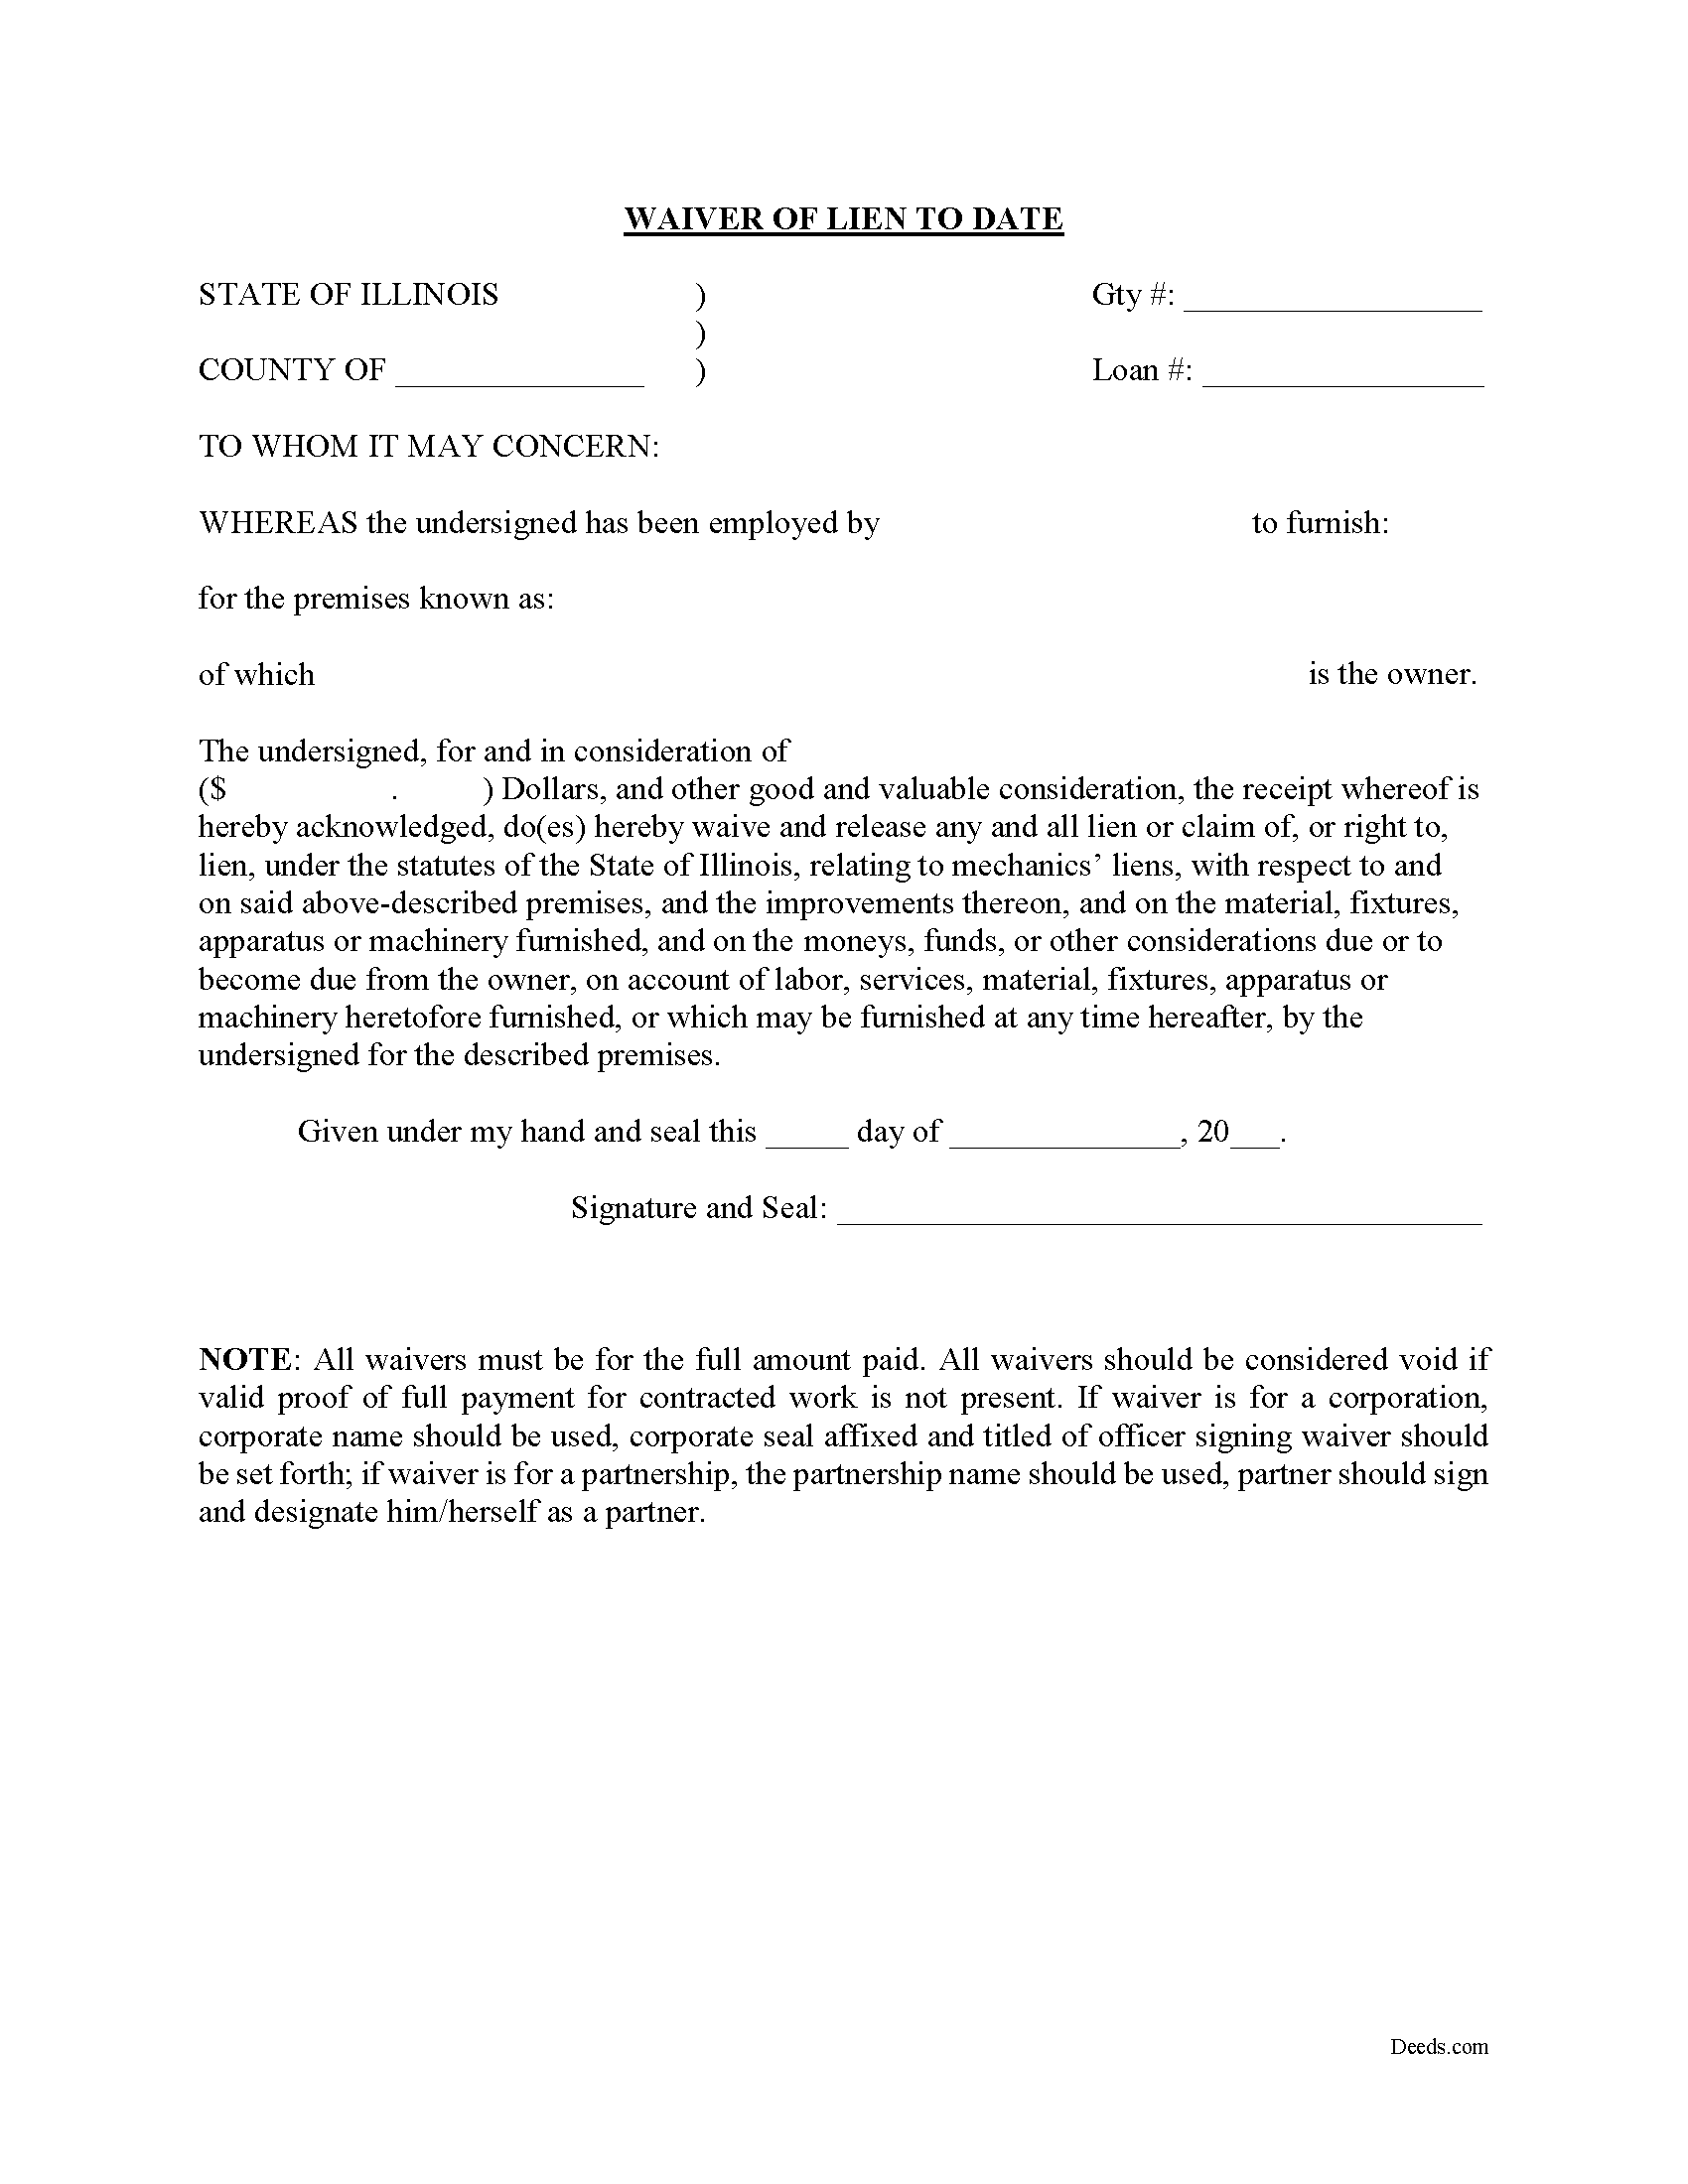 Waiver of Lien to Date Form